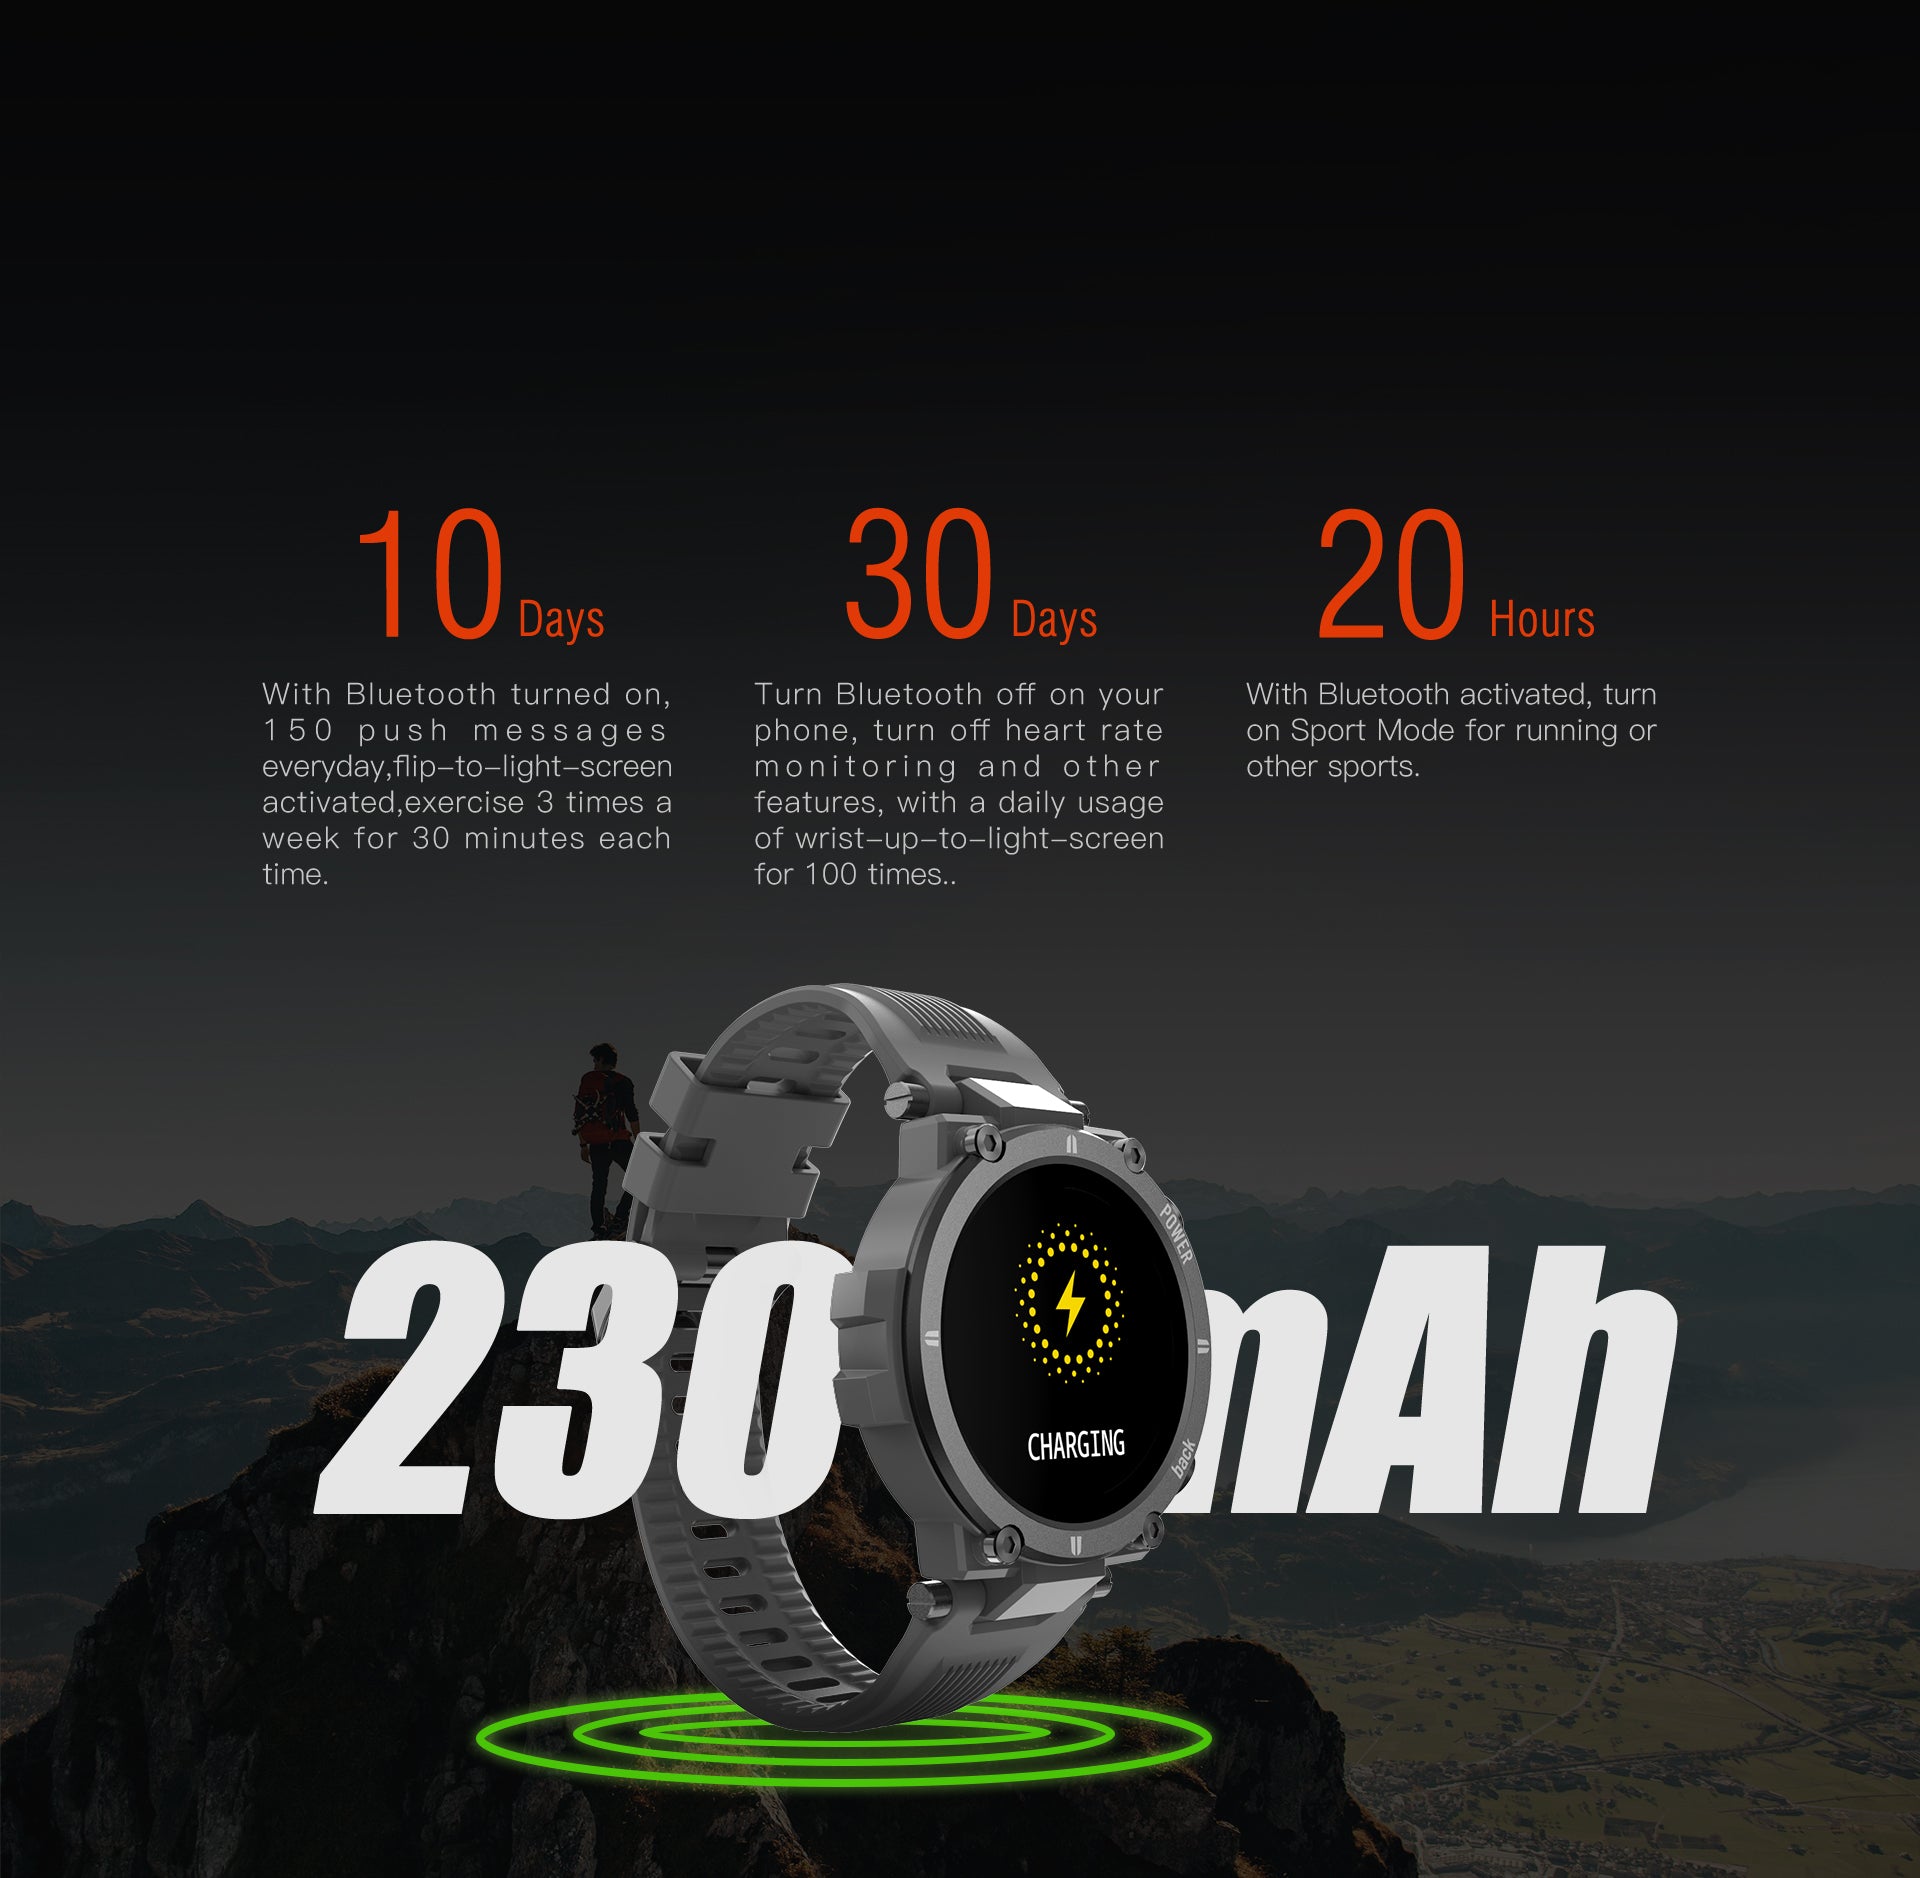 KOSPET Raptor Smartwatch 230mAh Battery Up to 20 day super long battery life makes a company for your field expeditions